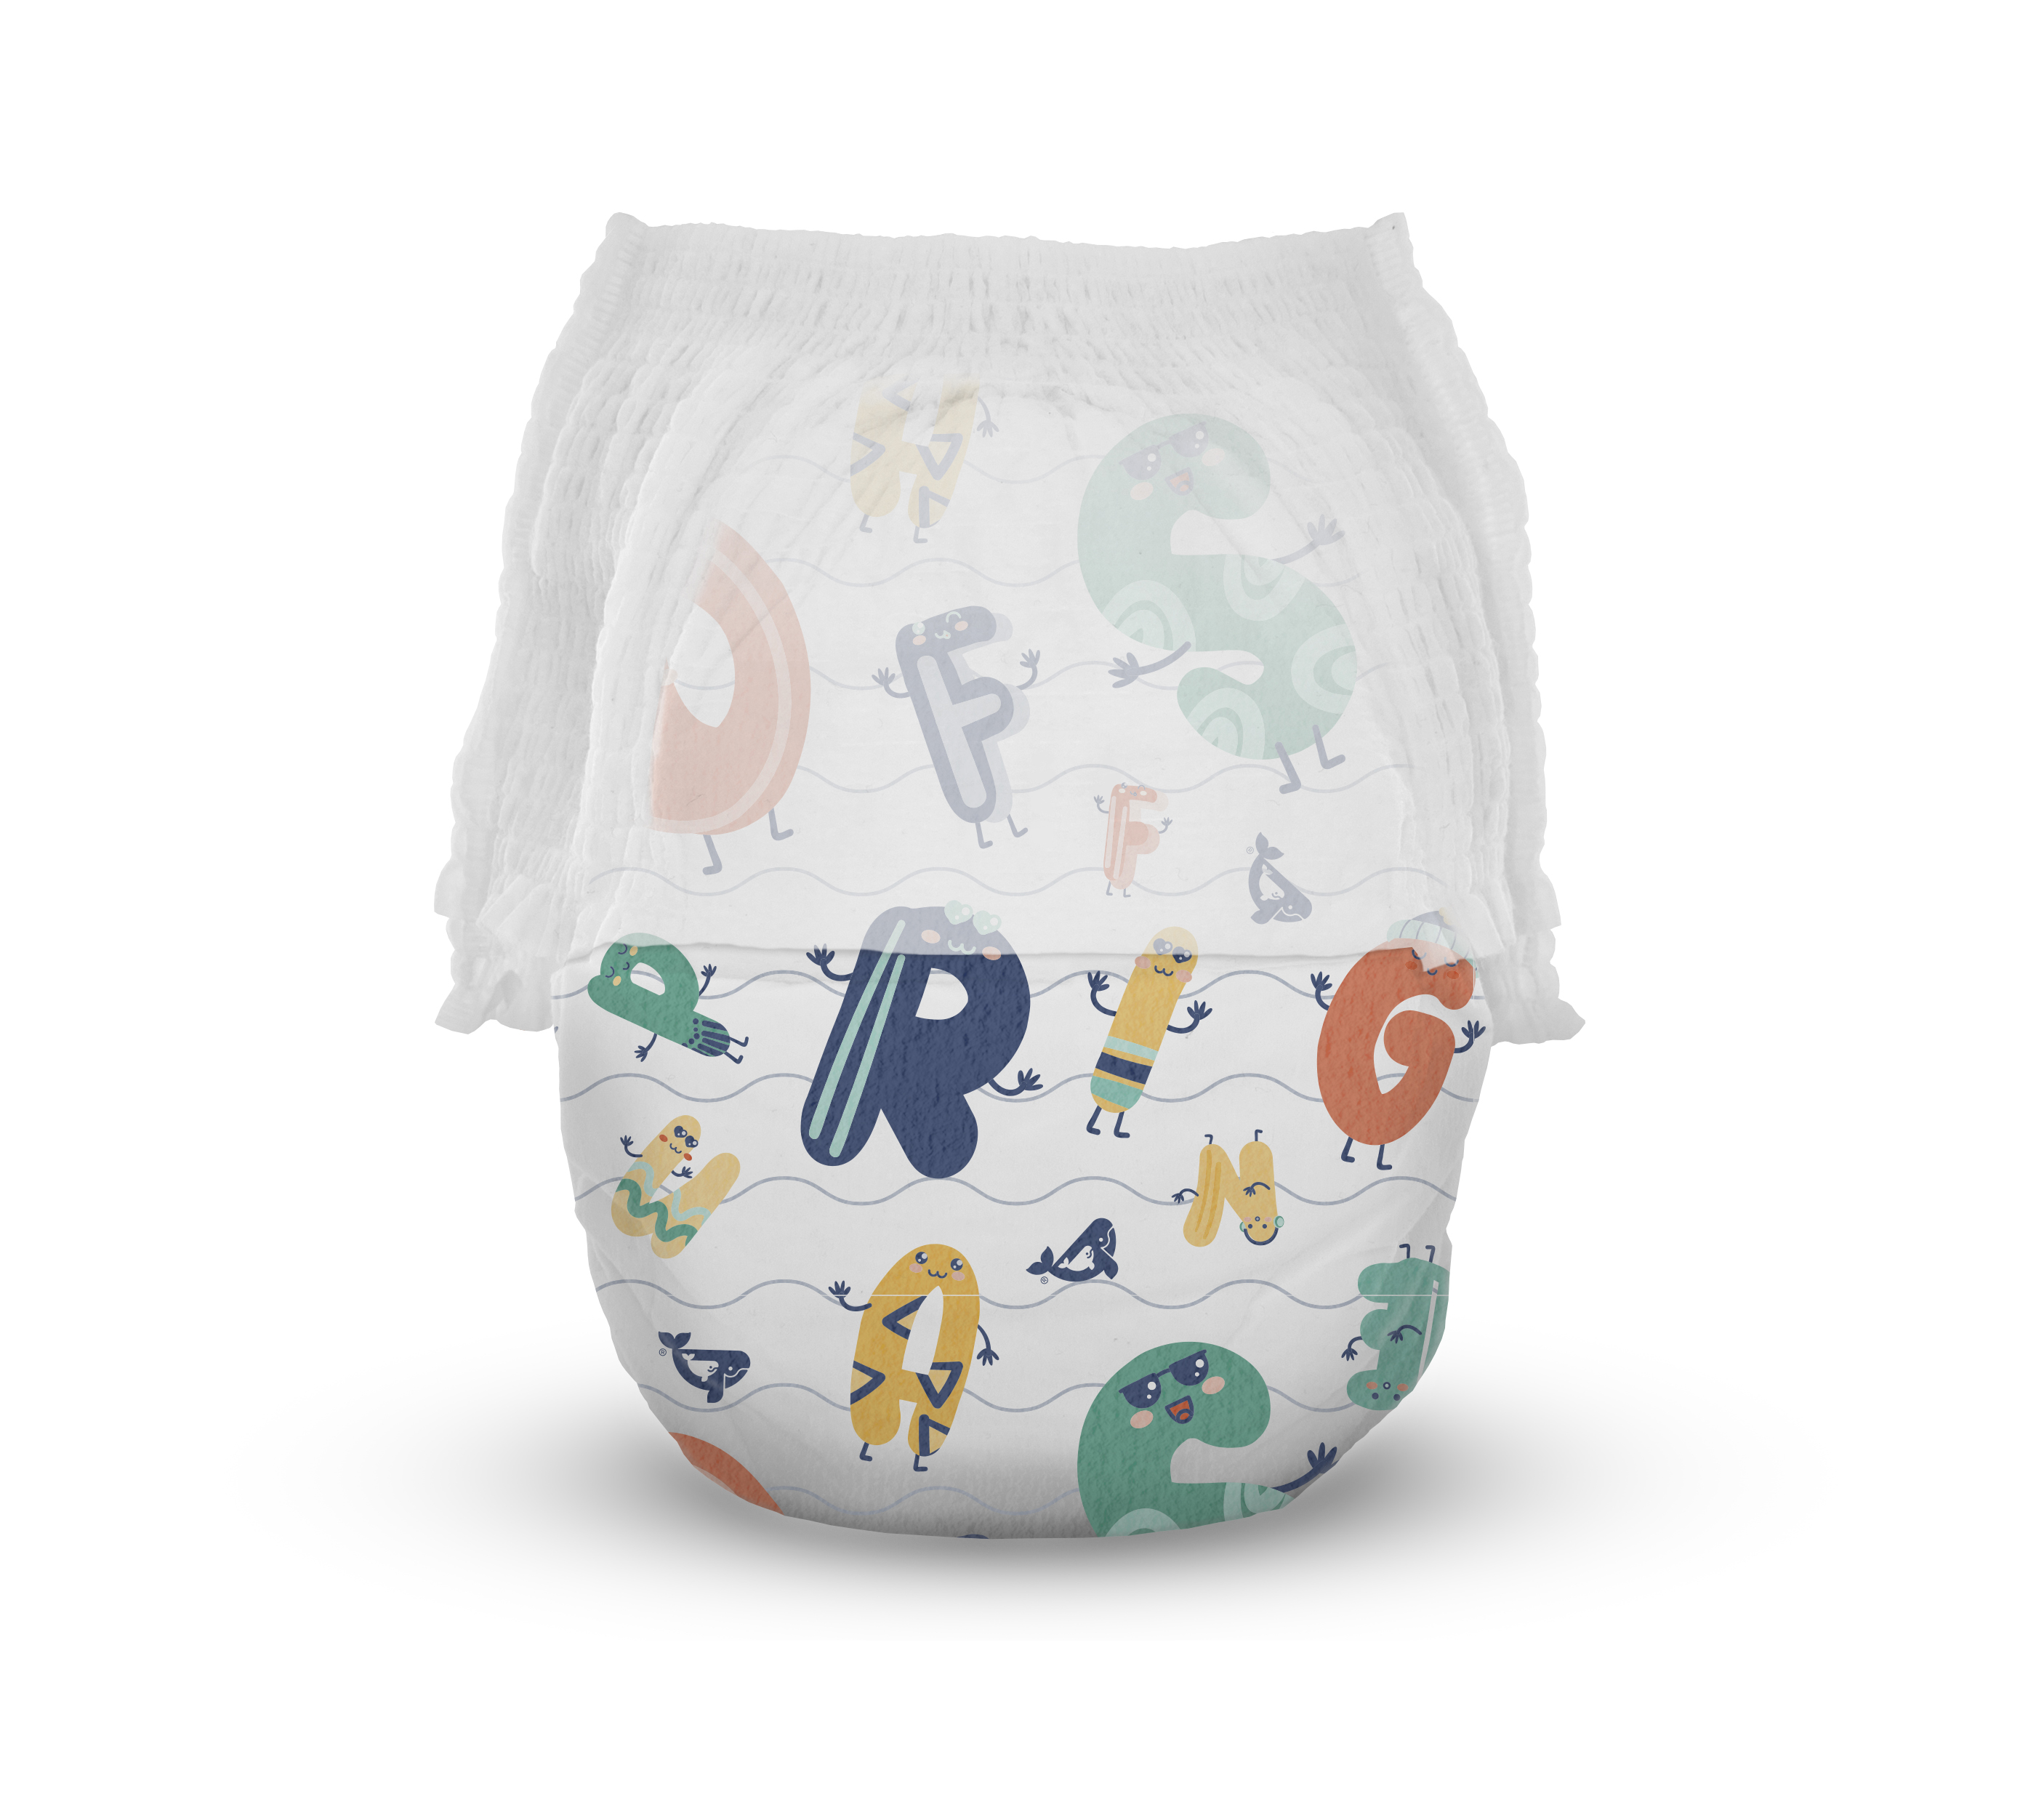 When your baby needs to dance, Huggies is there with a diaper that